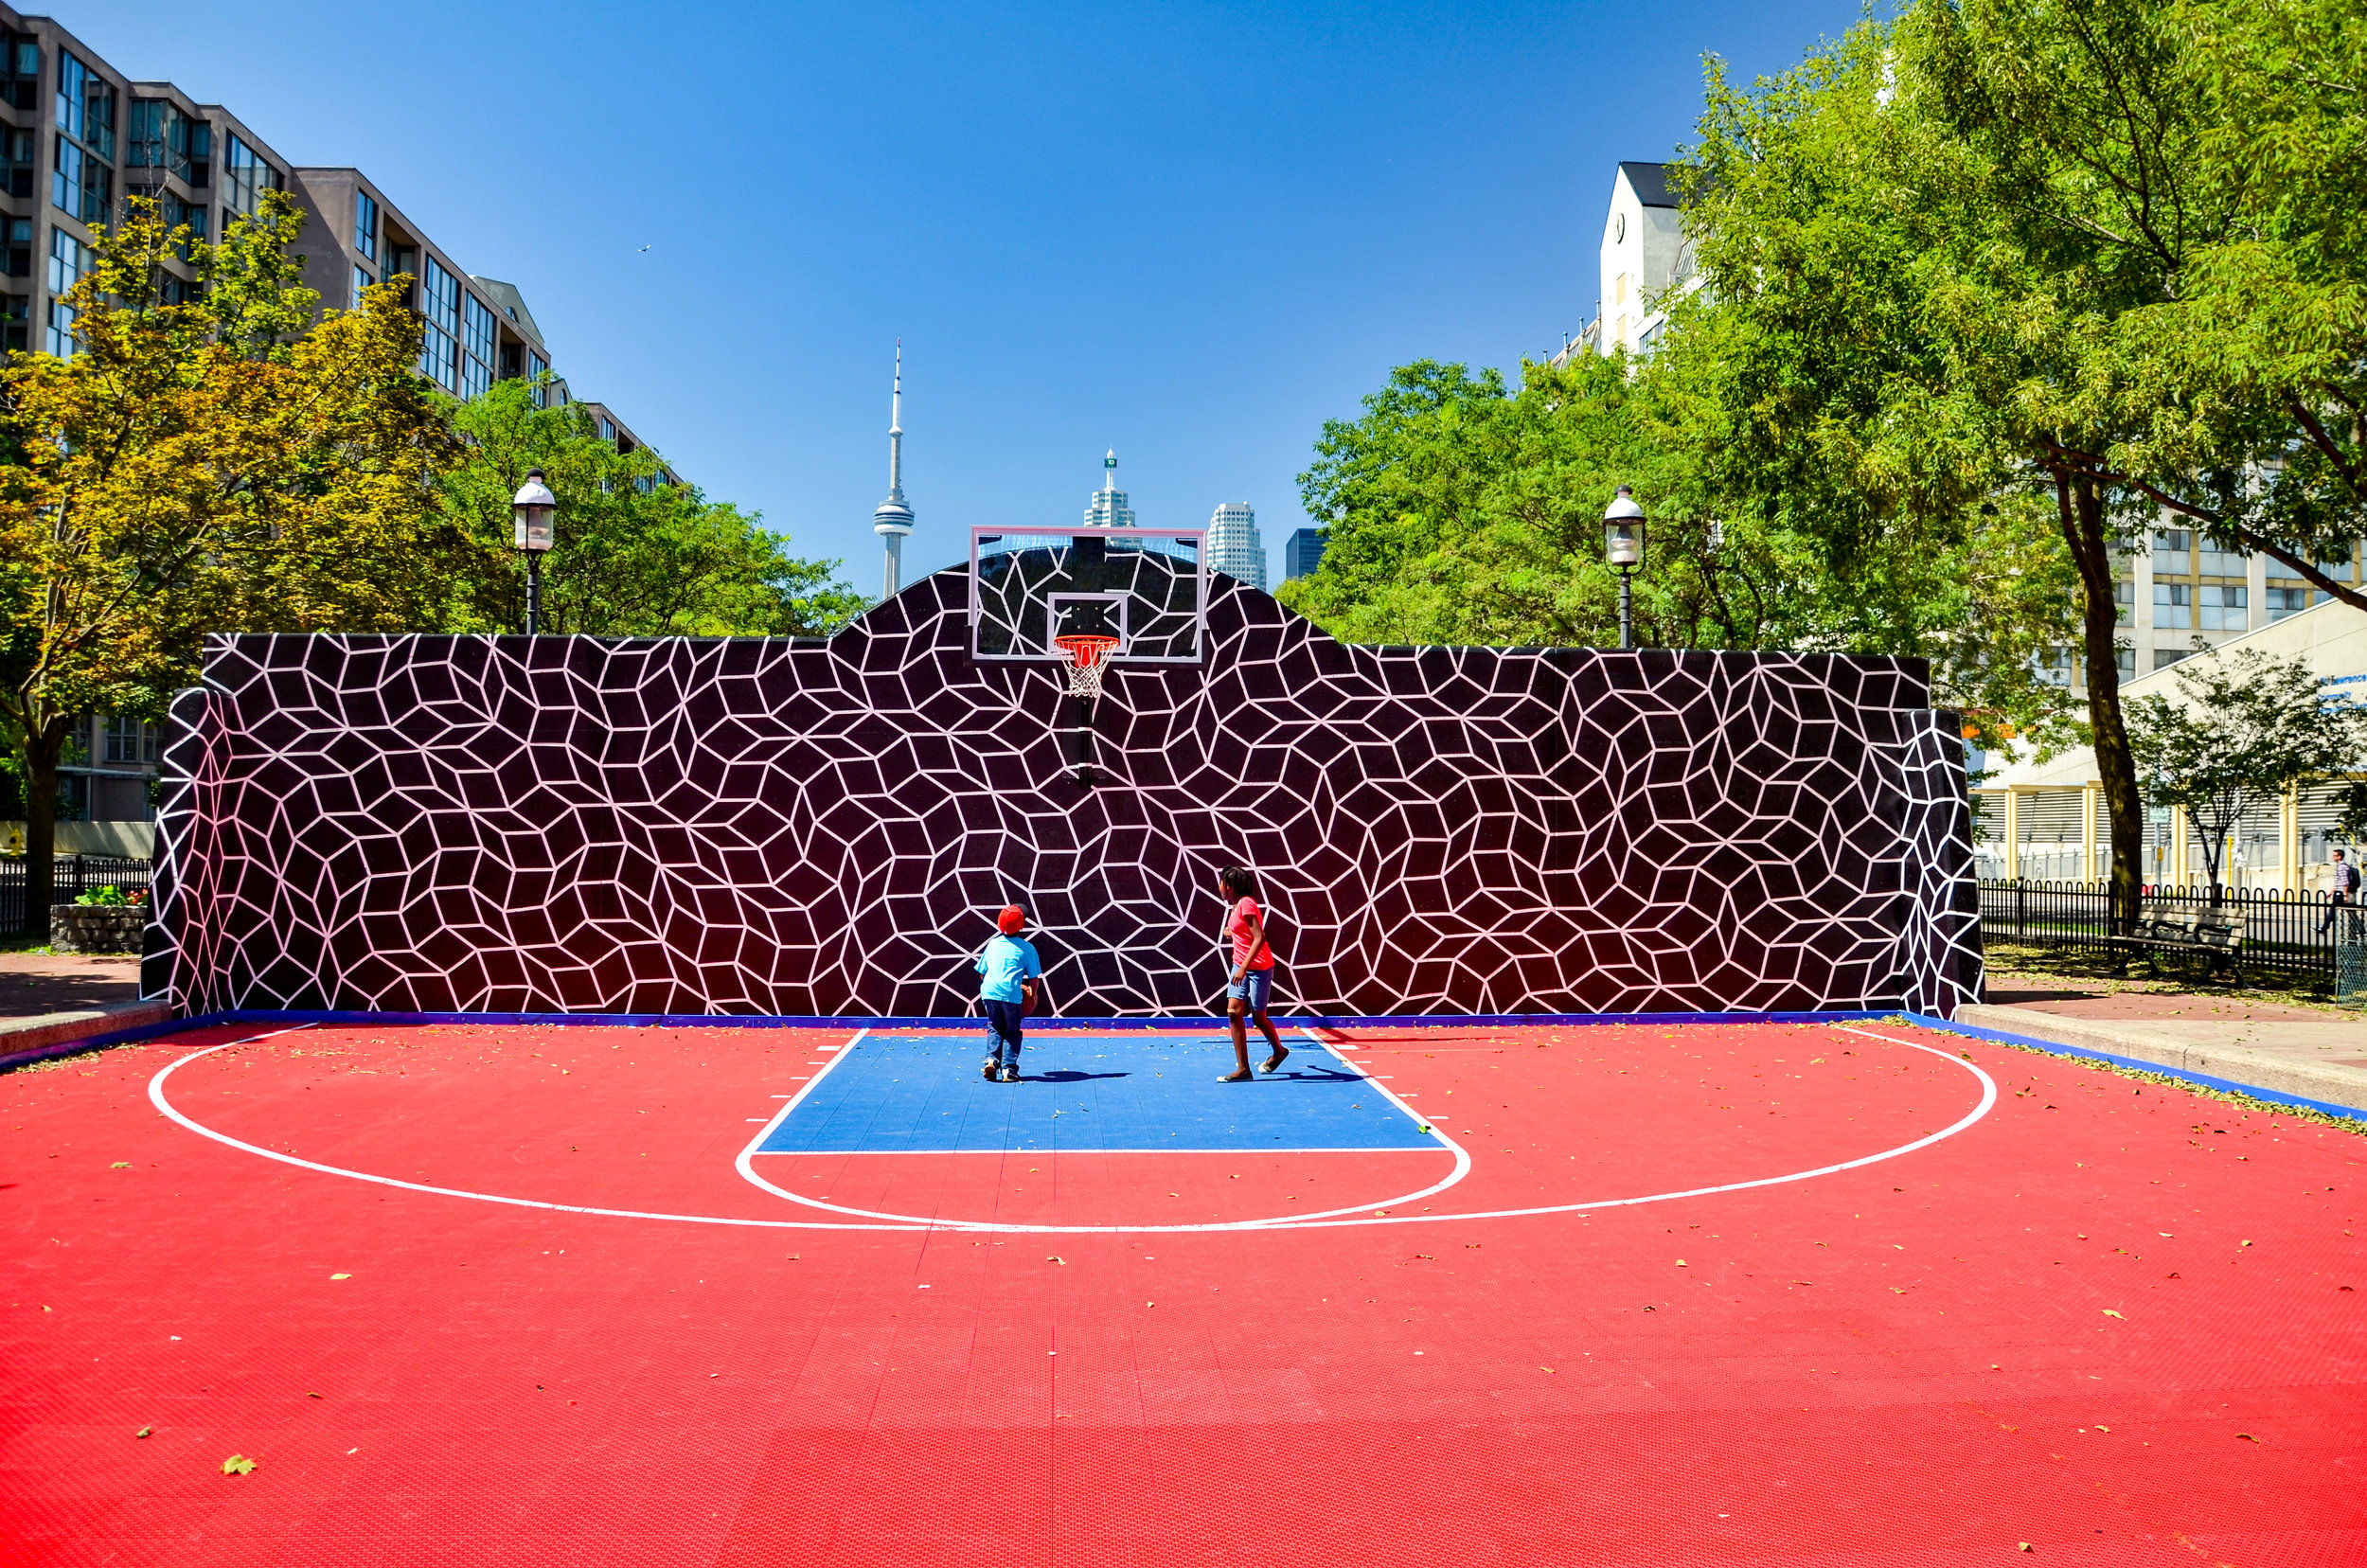 Painted basketball court